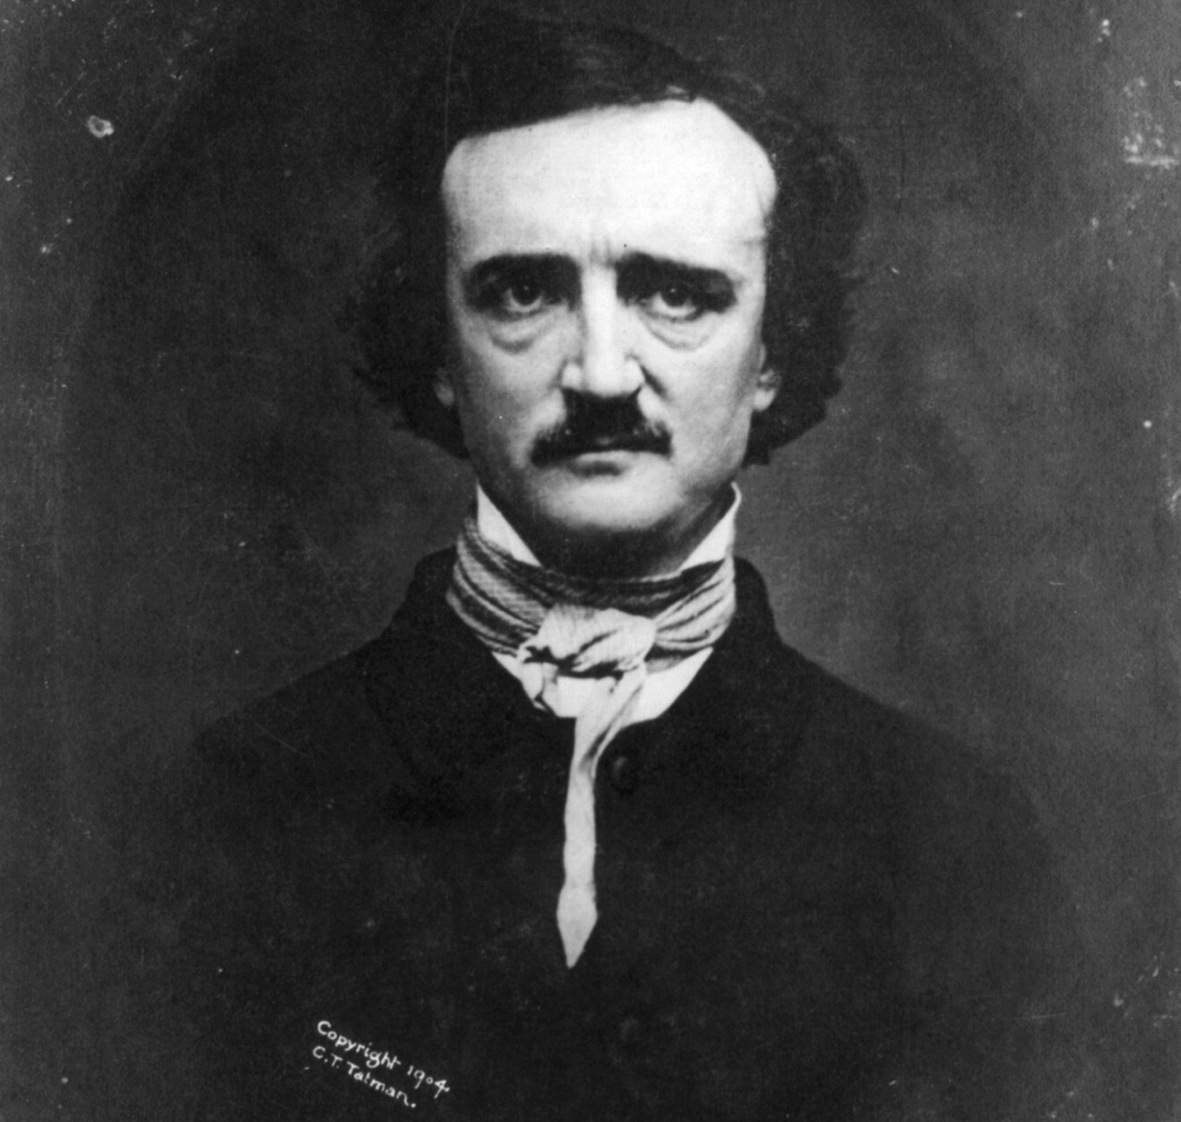 Commemorating the Publication of Poe's 'The Raven' - Atlas Obscura